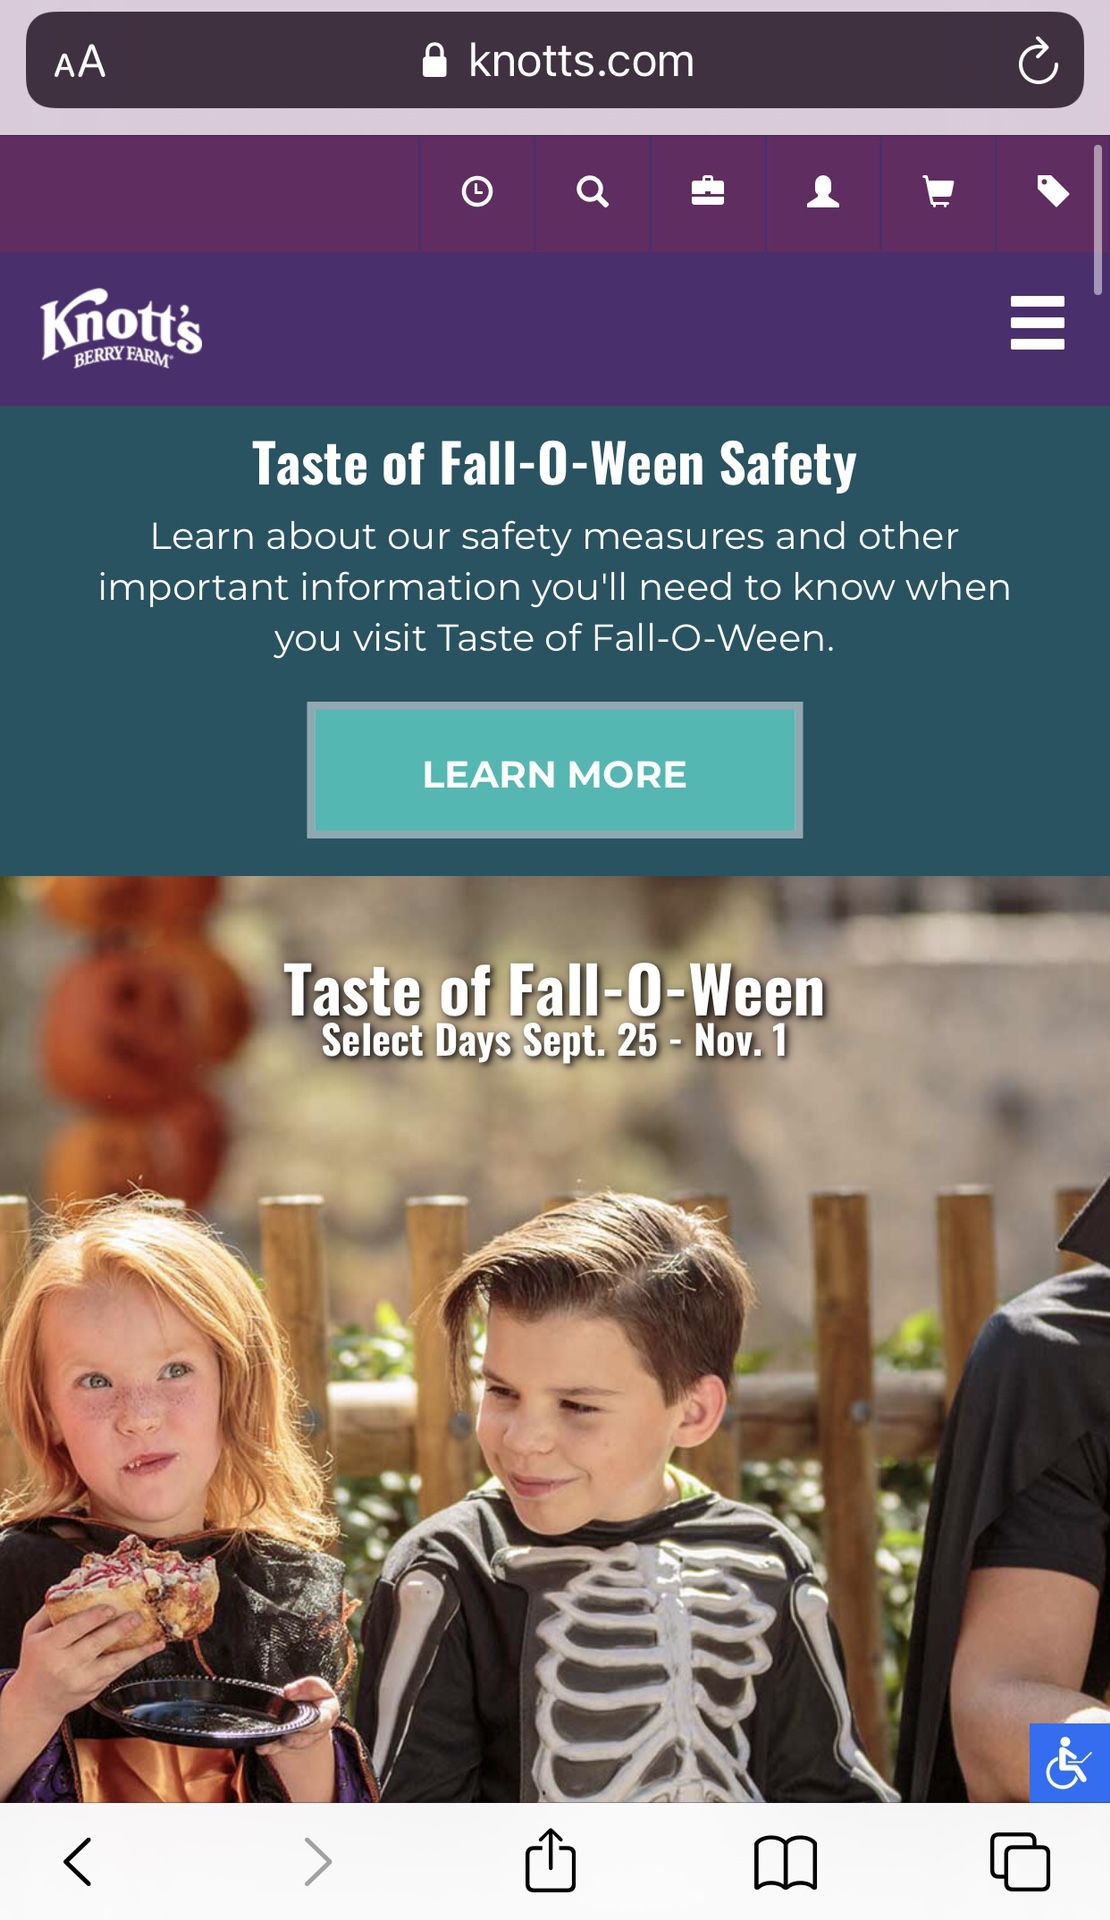 Oct 29 Two Adult Tickets for TASTE OF FALL-O-WEEN